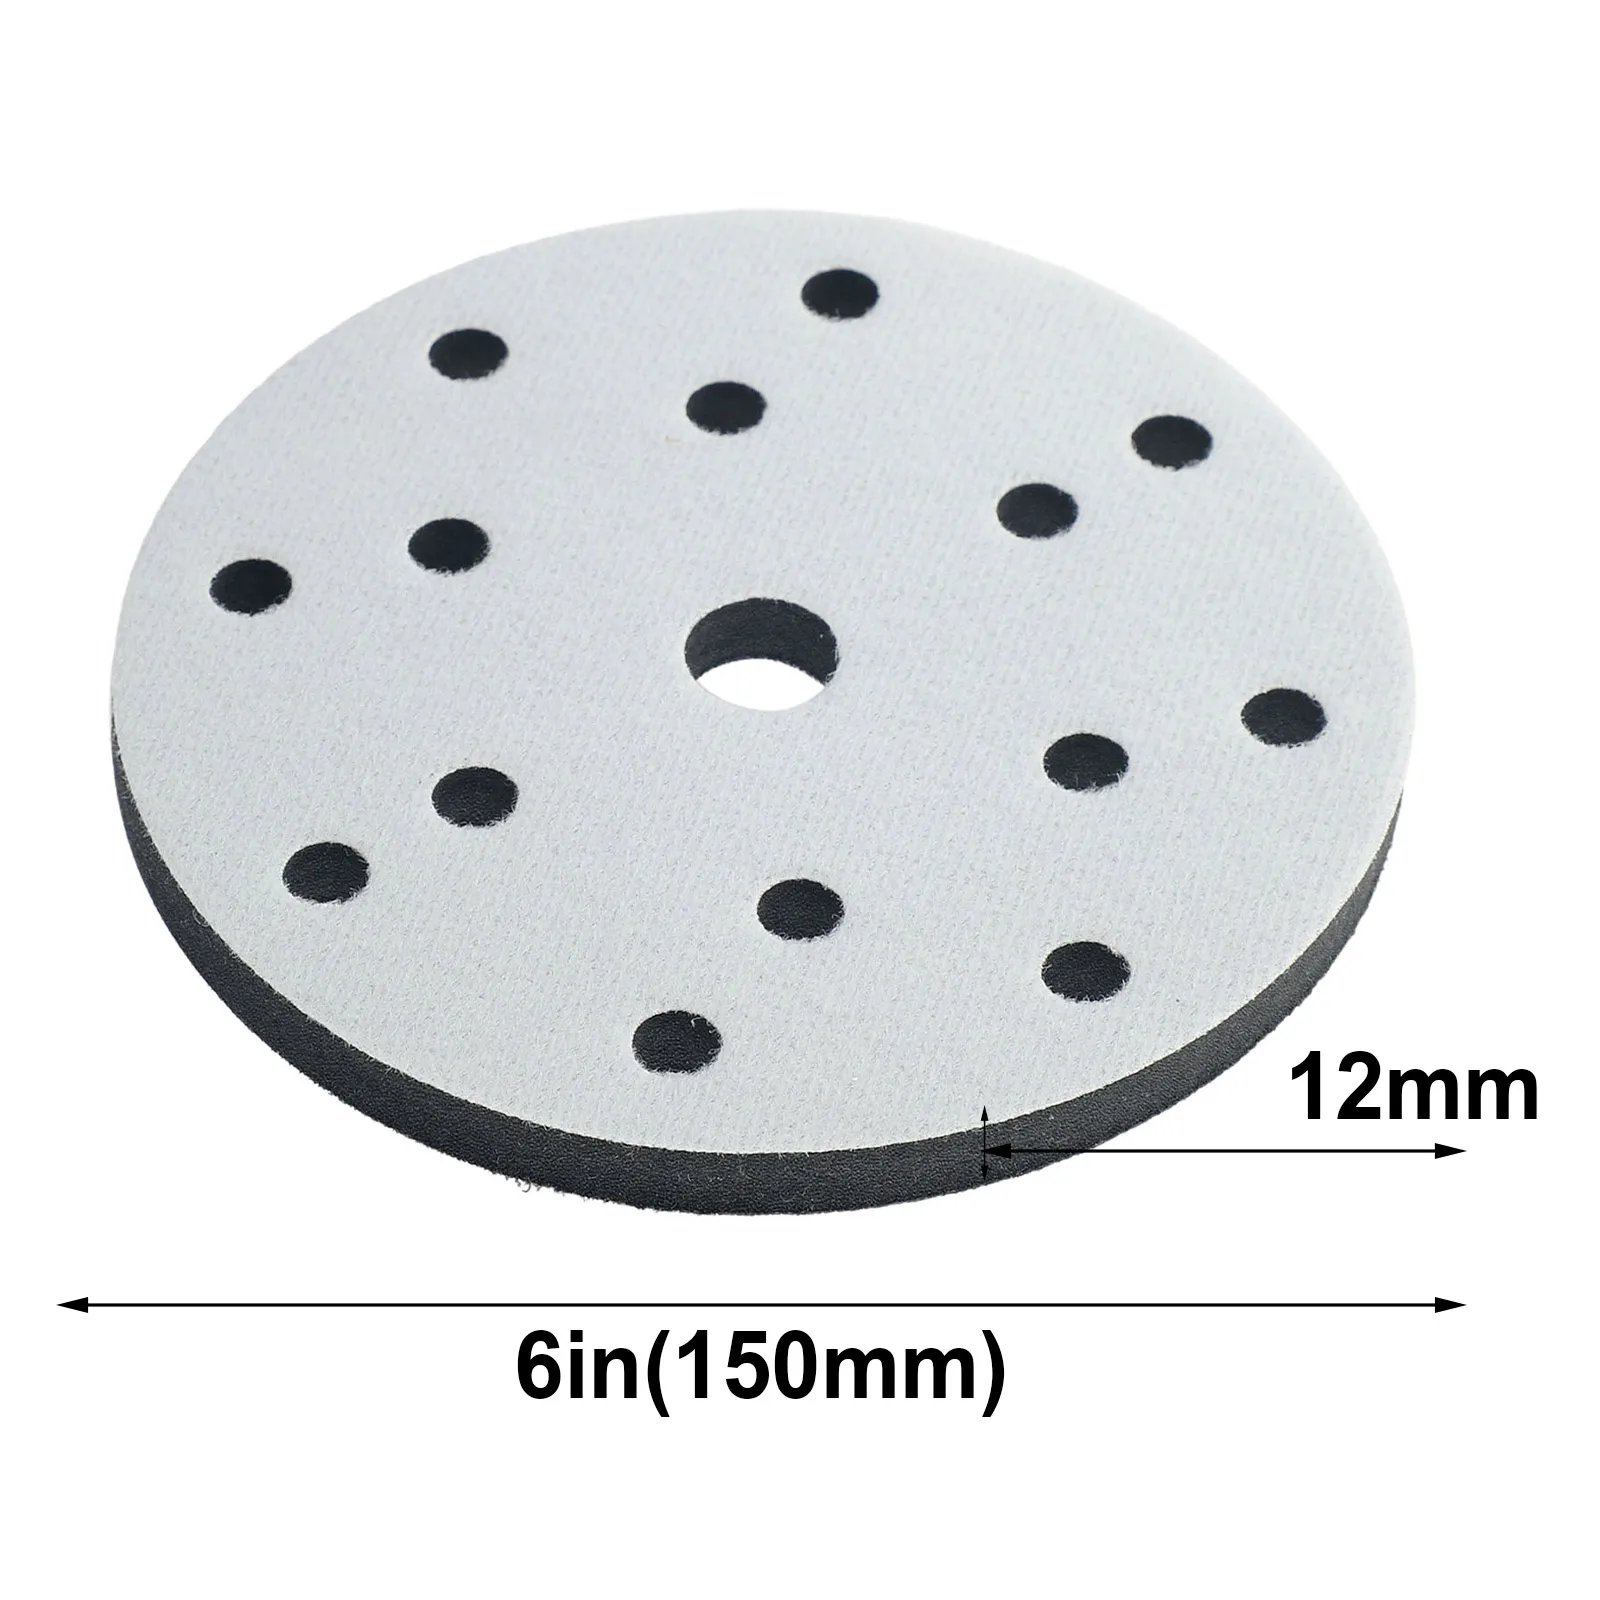 

Soft Interface Pad 6Inch 150mm 15 Holes Sanding Pads Hook And Loop Sanding Disc Buffer Sponge Interface Cushion Pad For Backing